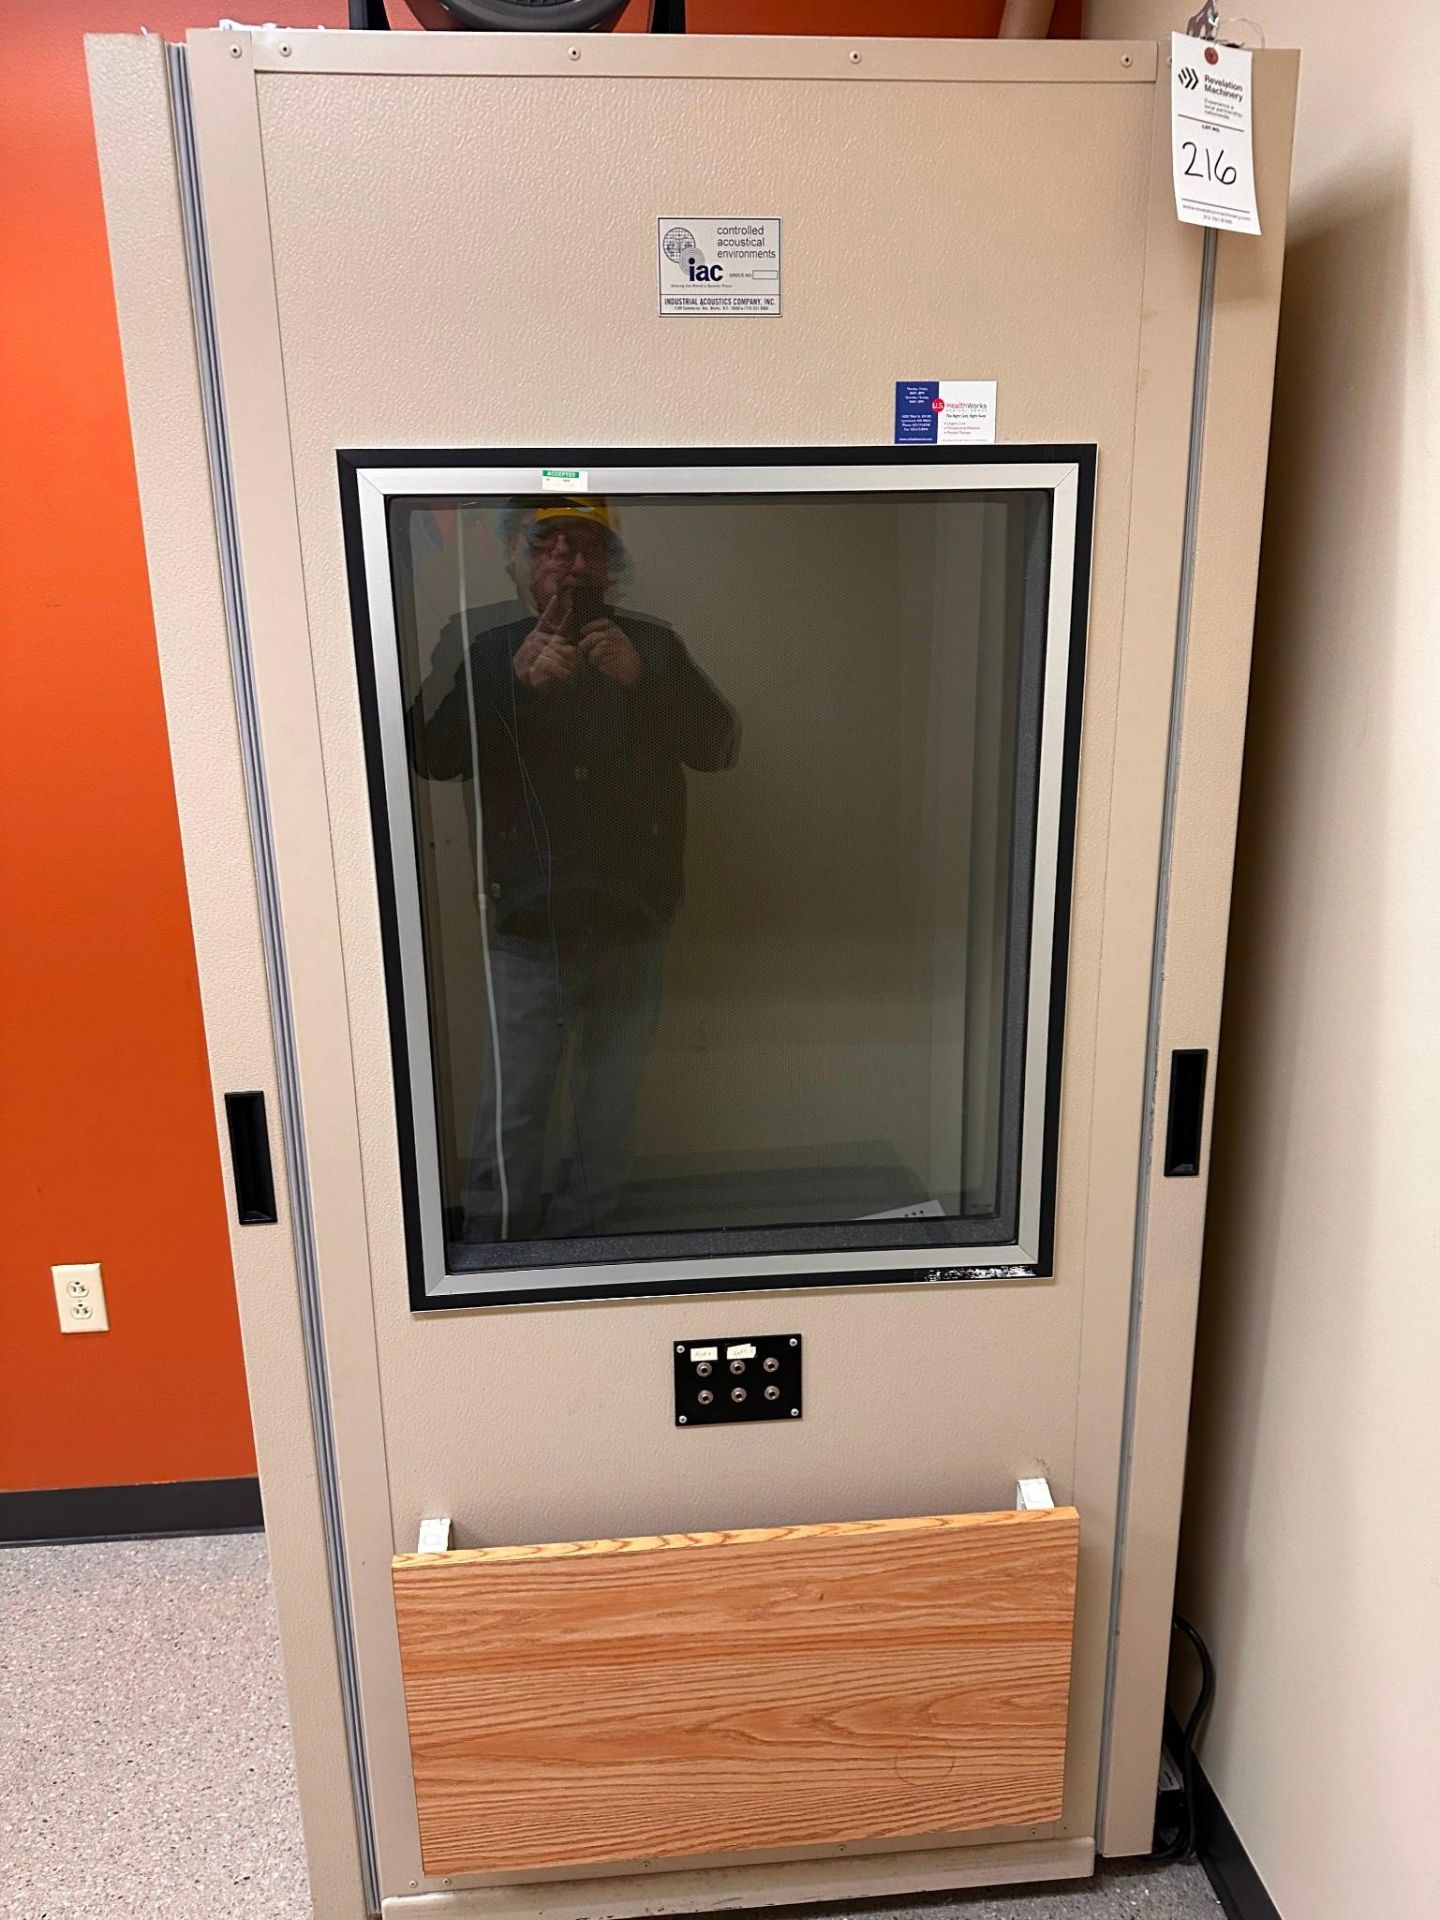 CONTROLLED ACOUSTICAL ENVIRONMENTAL CHAMBER